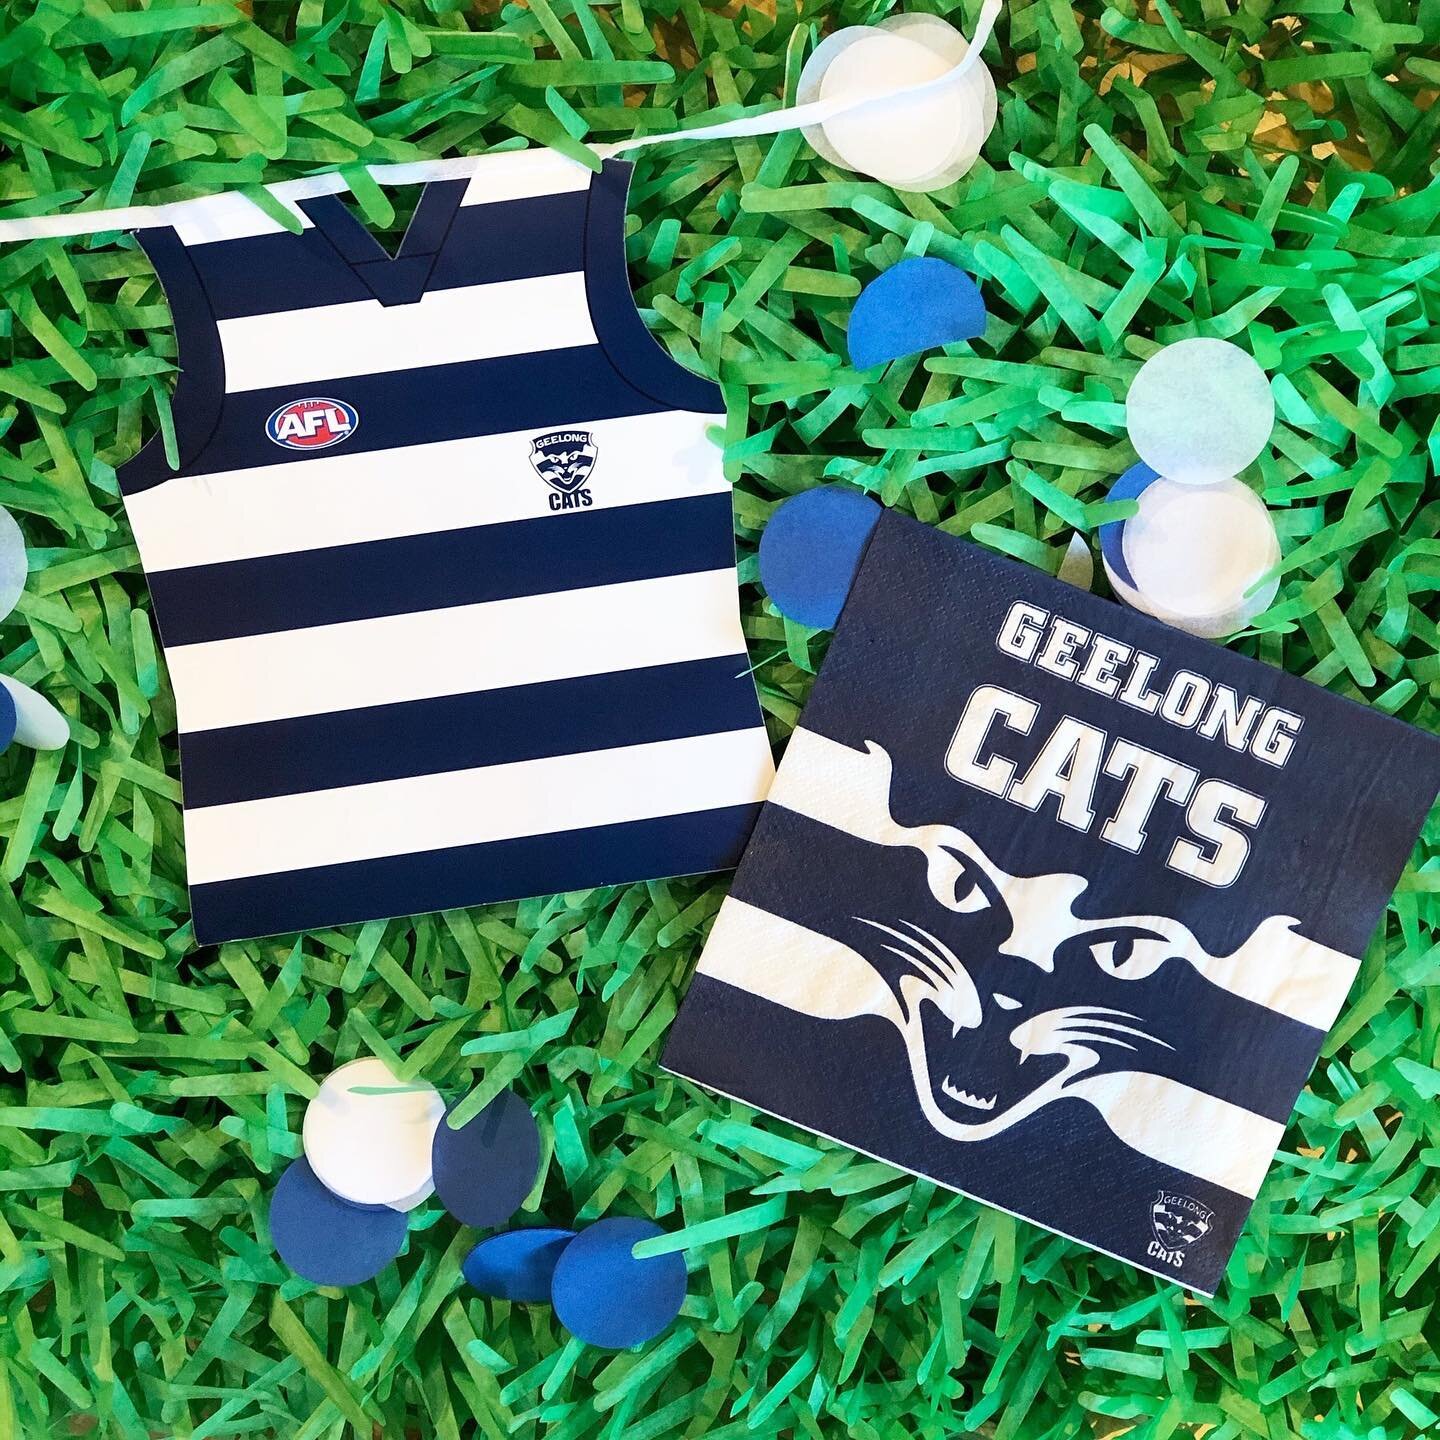 Get finals ready today and pop by @burntbuttercakes for your offical @afl party supplies! Open 9-2pm @ 197 Swan St Richmond. 🏈